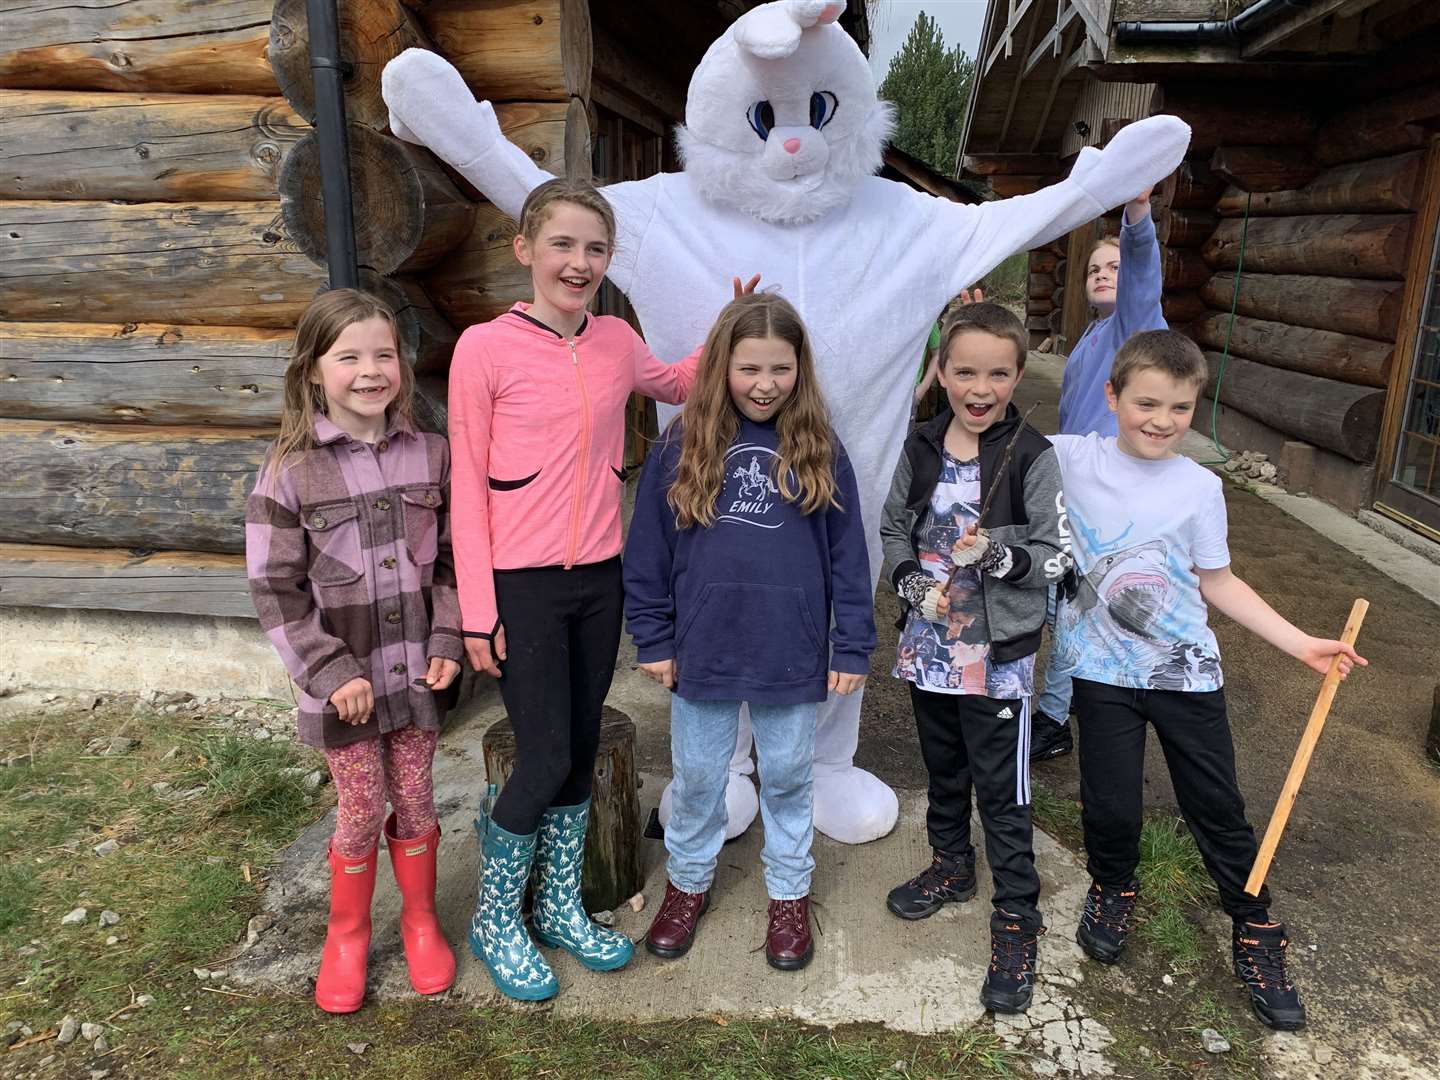 A highlight of the day was a visit from the Easter bunny who was greeted with delight by youngsters at the Borgie Forest event.